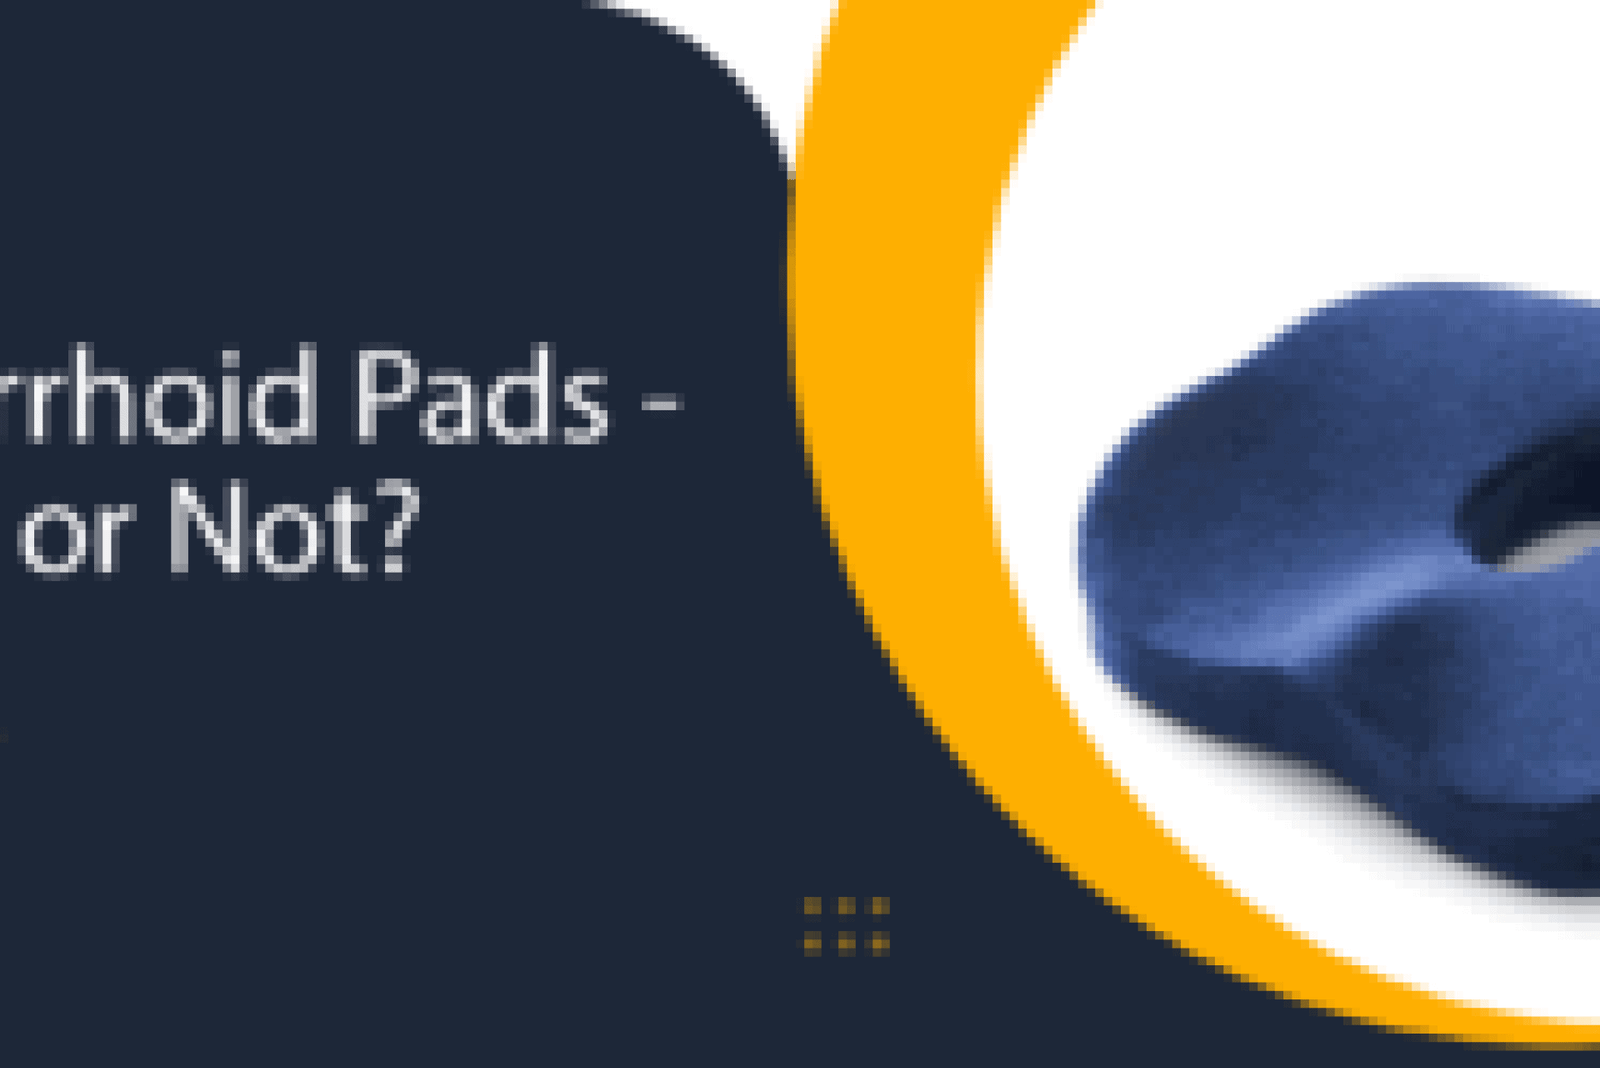 Hemorrhoid pads - useful or not